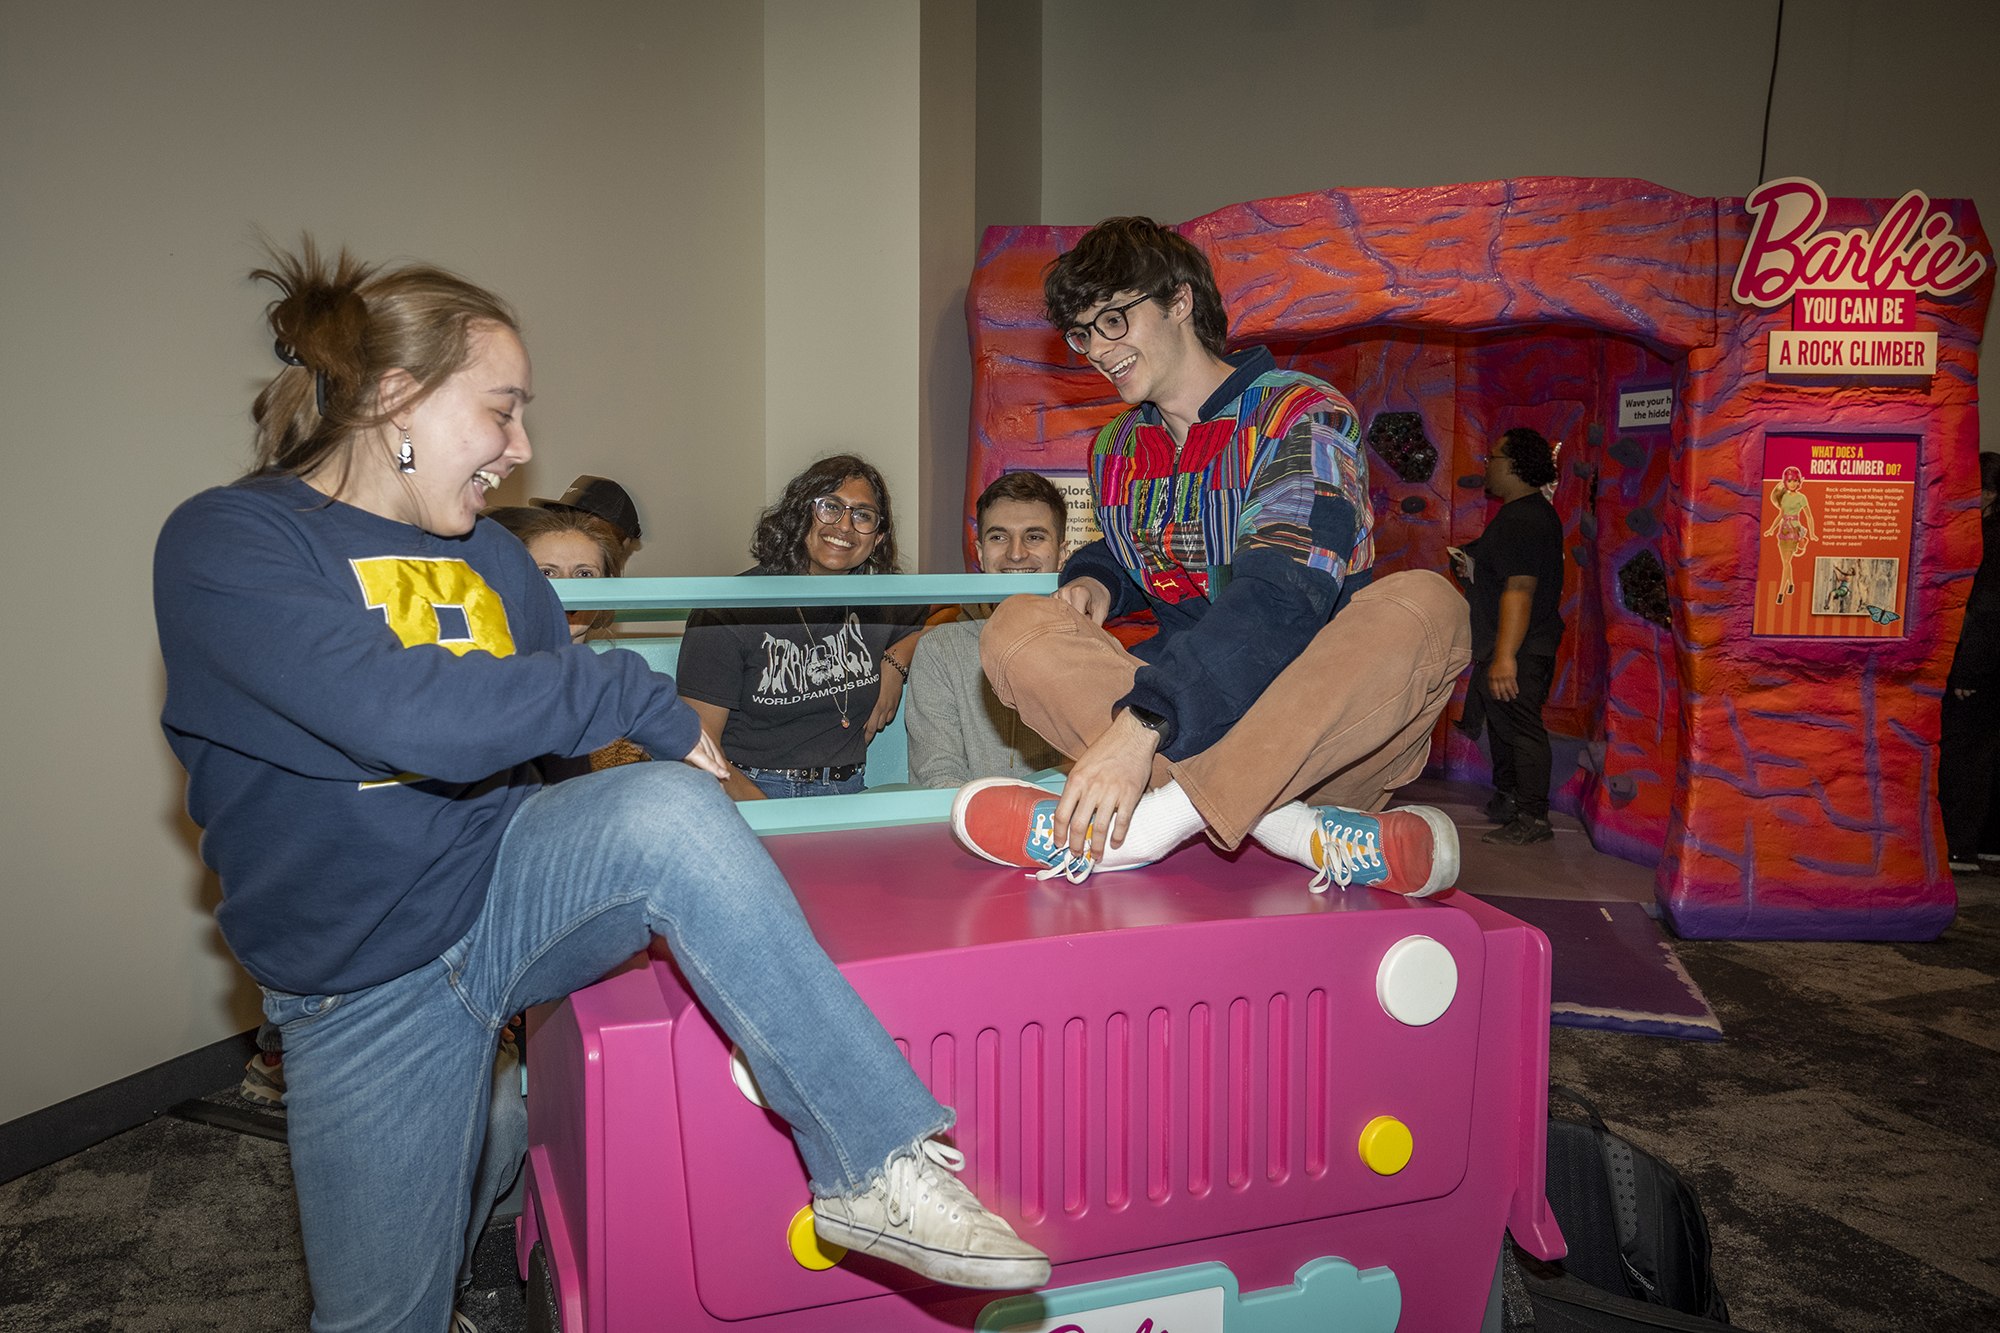 A group of students engage with the Barbie exhibit at the Strong National Museum of Play.